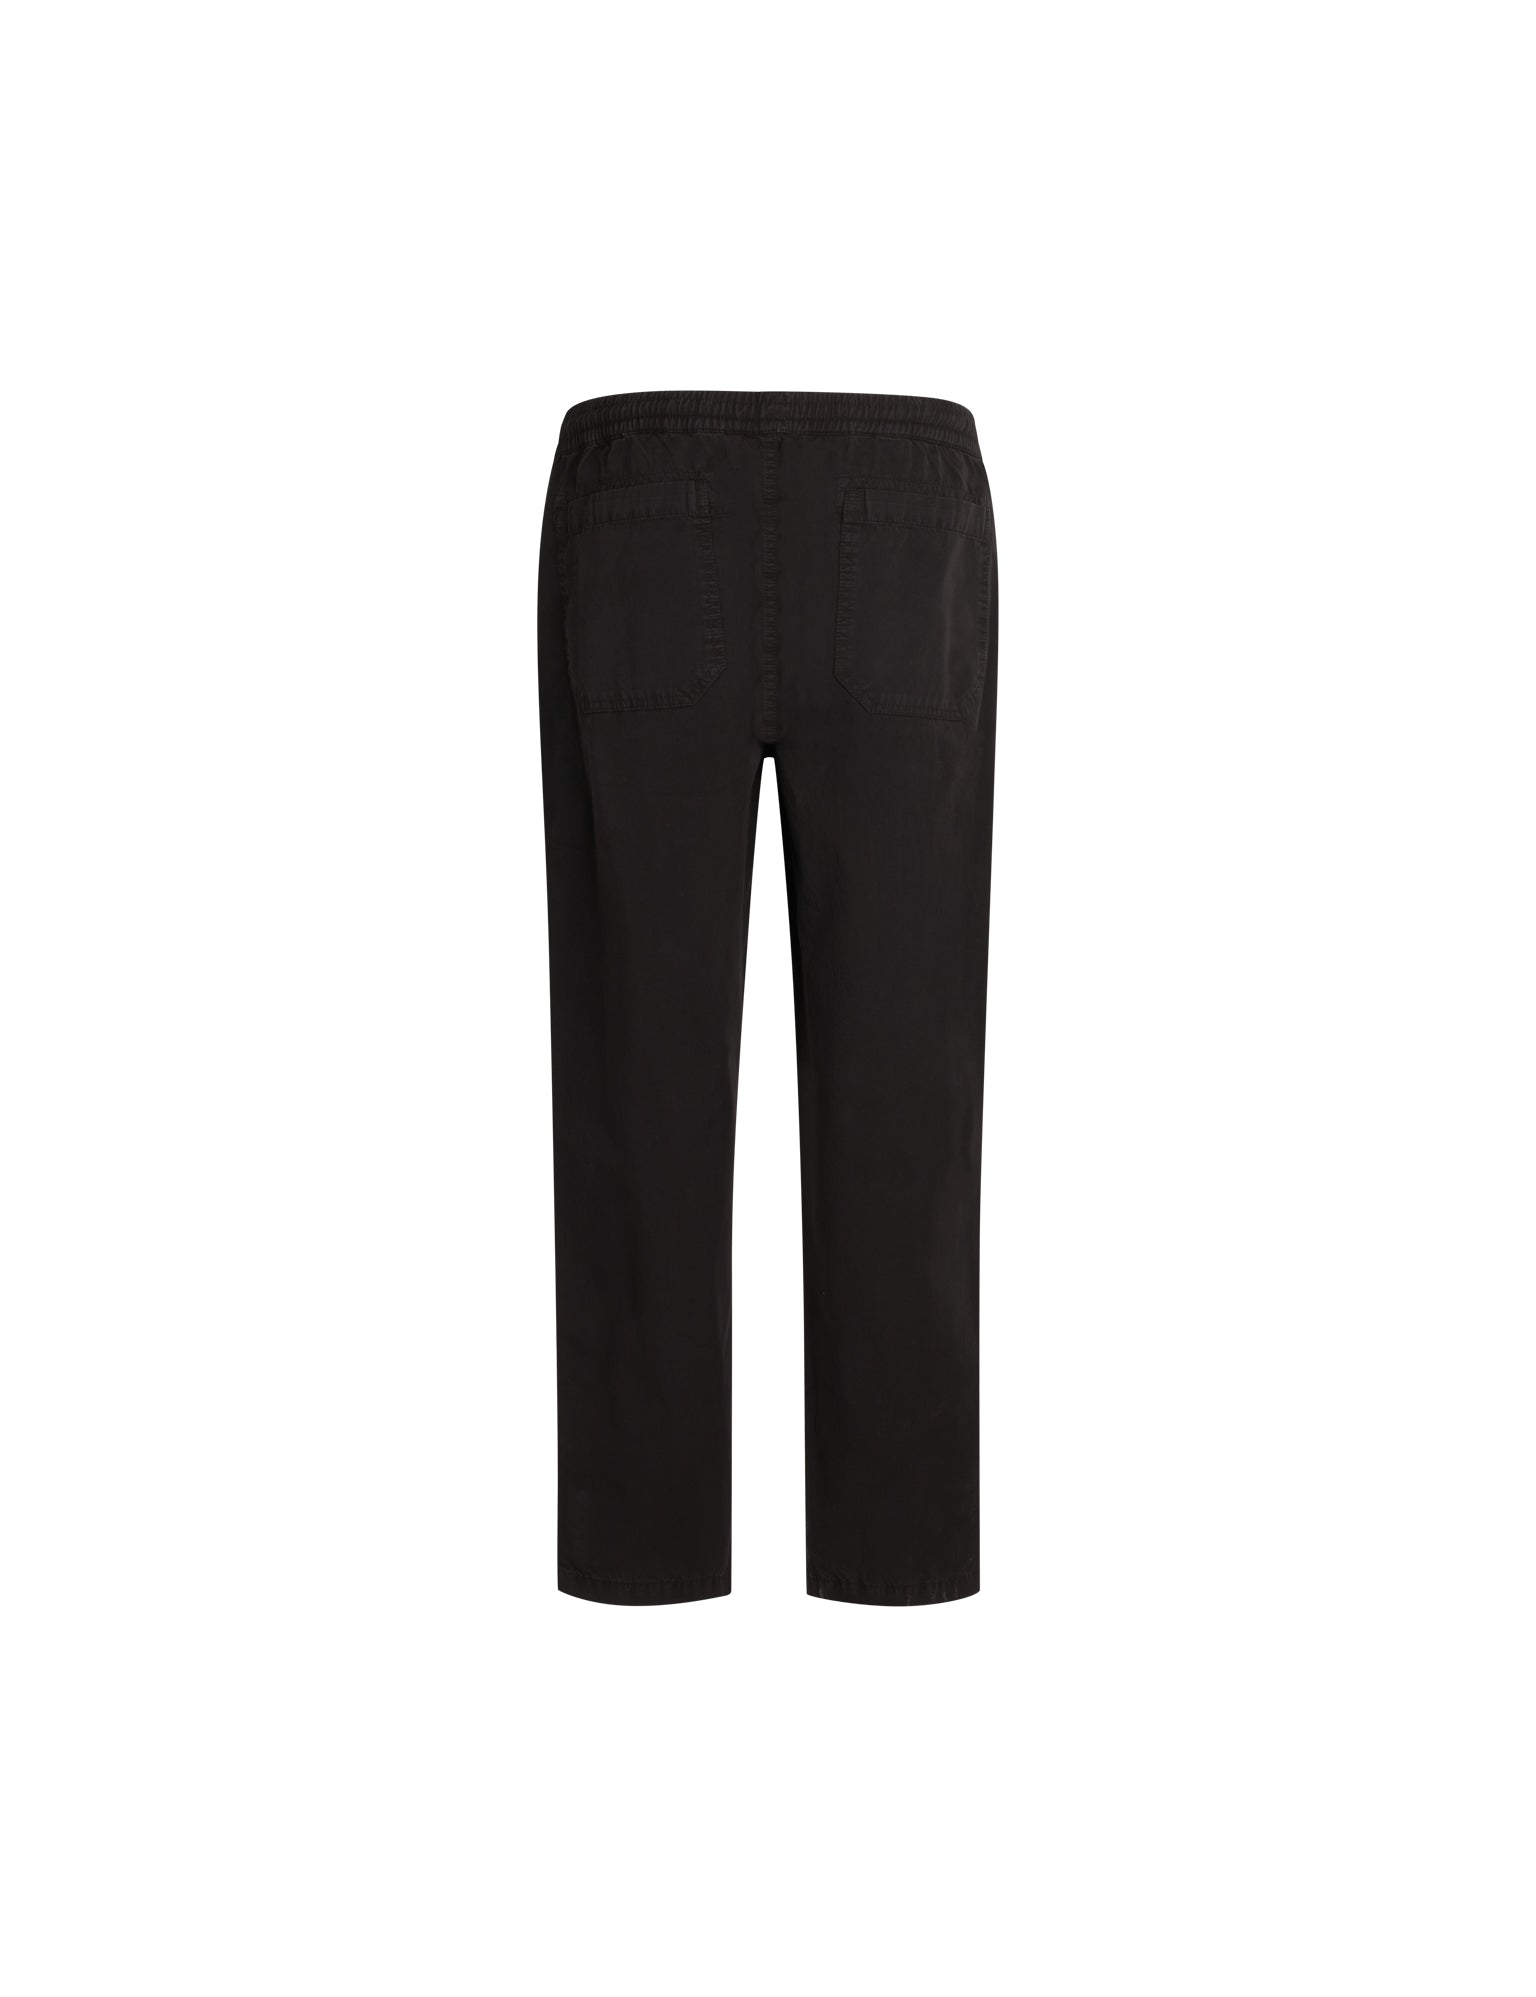 ASDA GEORGE WOMENS Black Polyester Trousers Size 14 L28 in Regular £6.00 -  PicClick UK